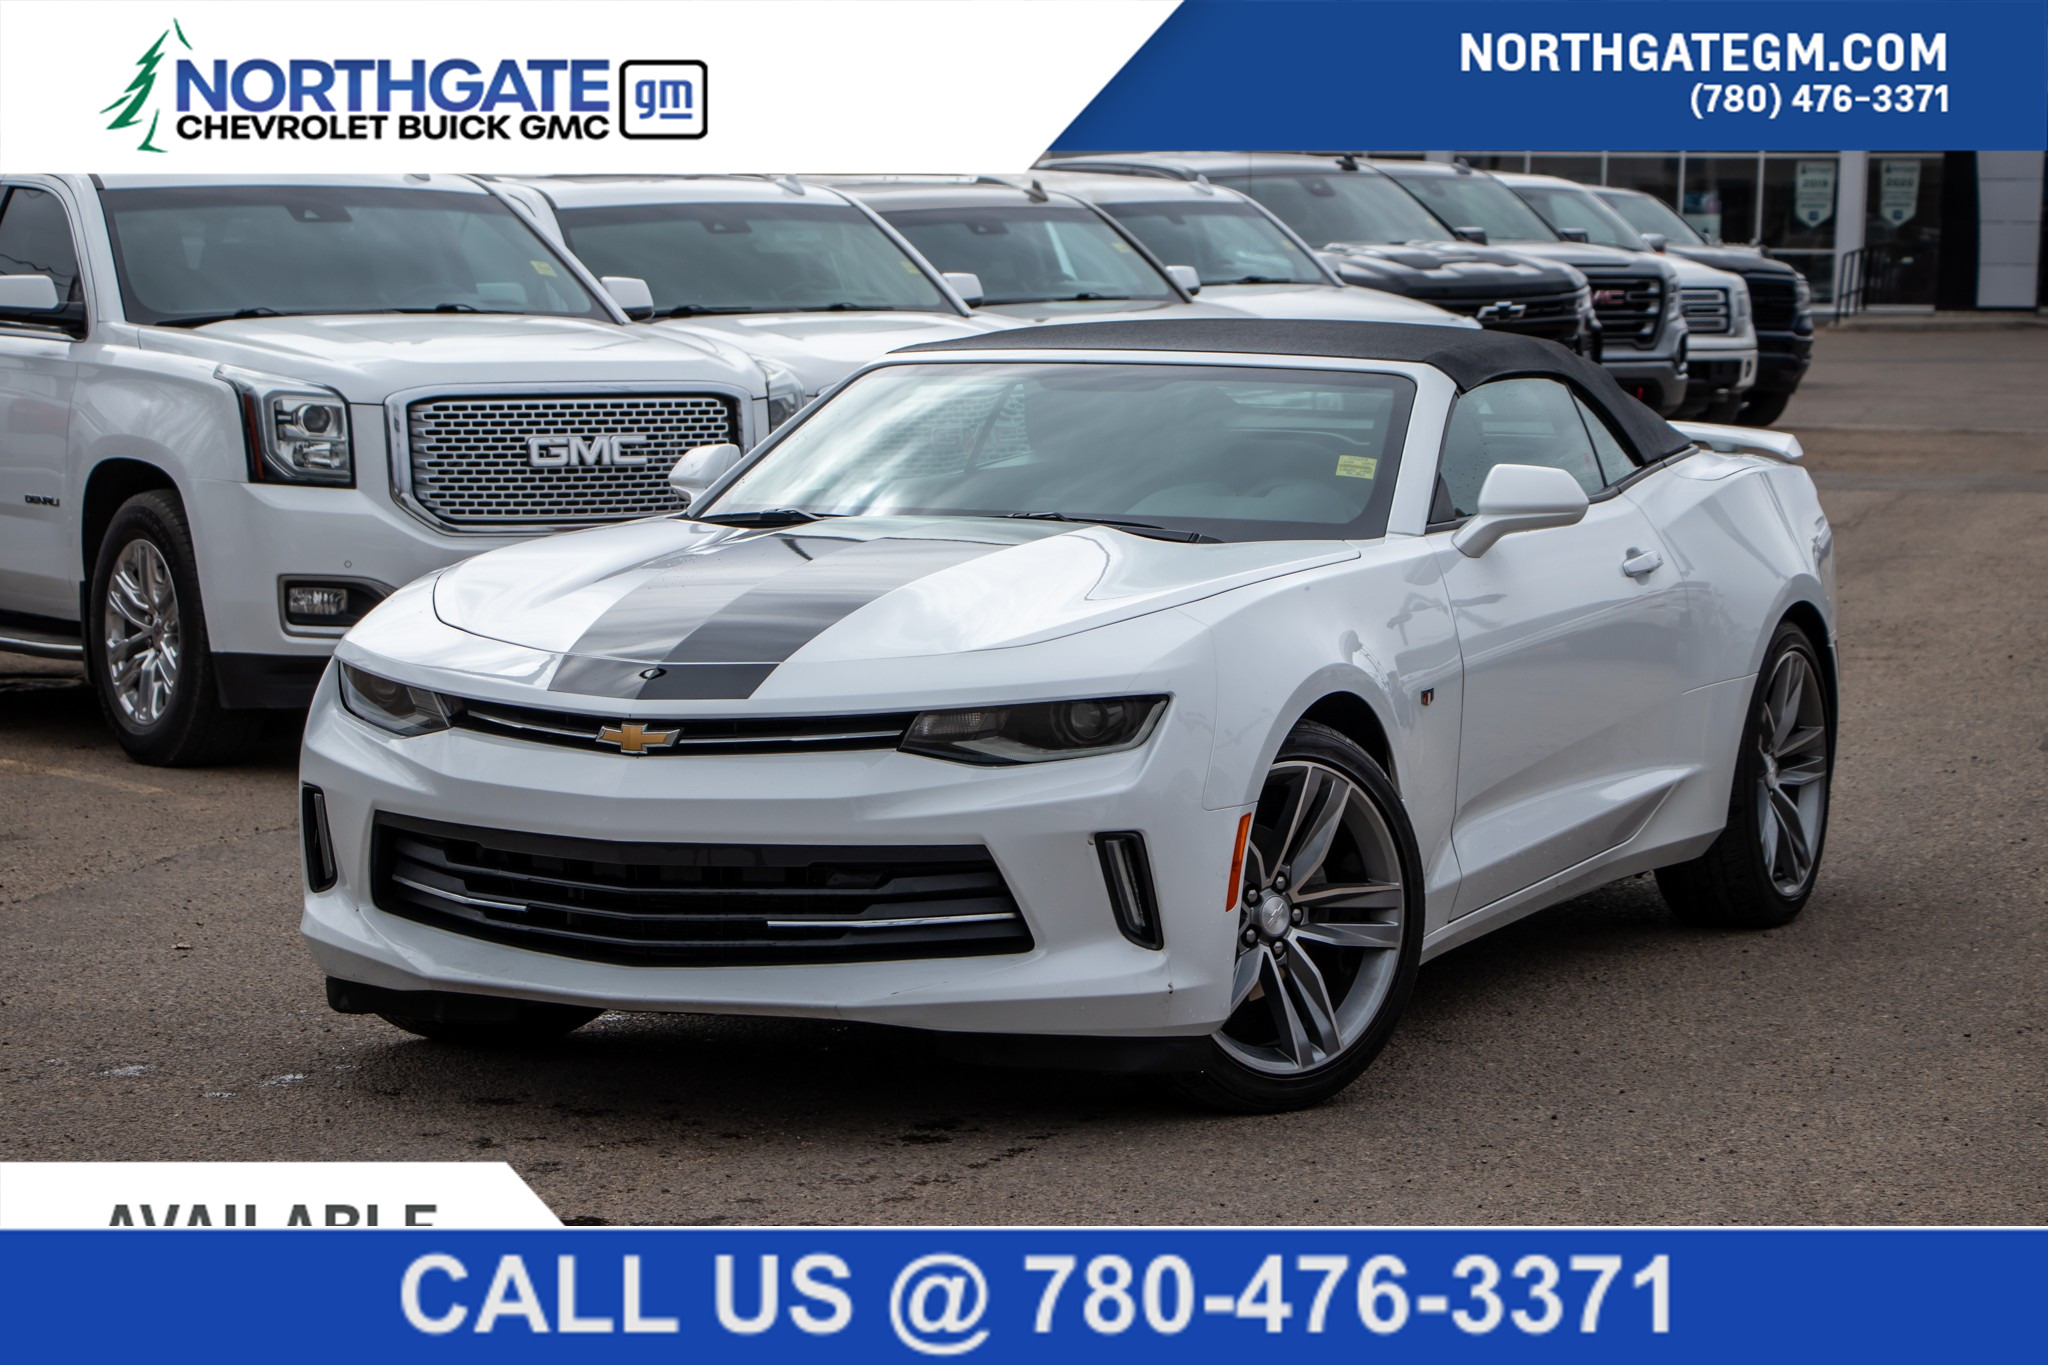 2016 Chevrolet Camaro 1LT RS PACKAGE | REAR VISION CAMERA | BLUETOOTH | 